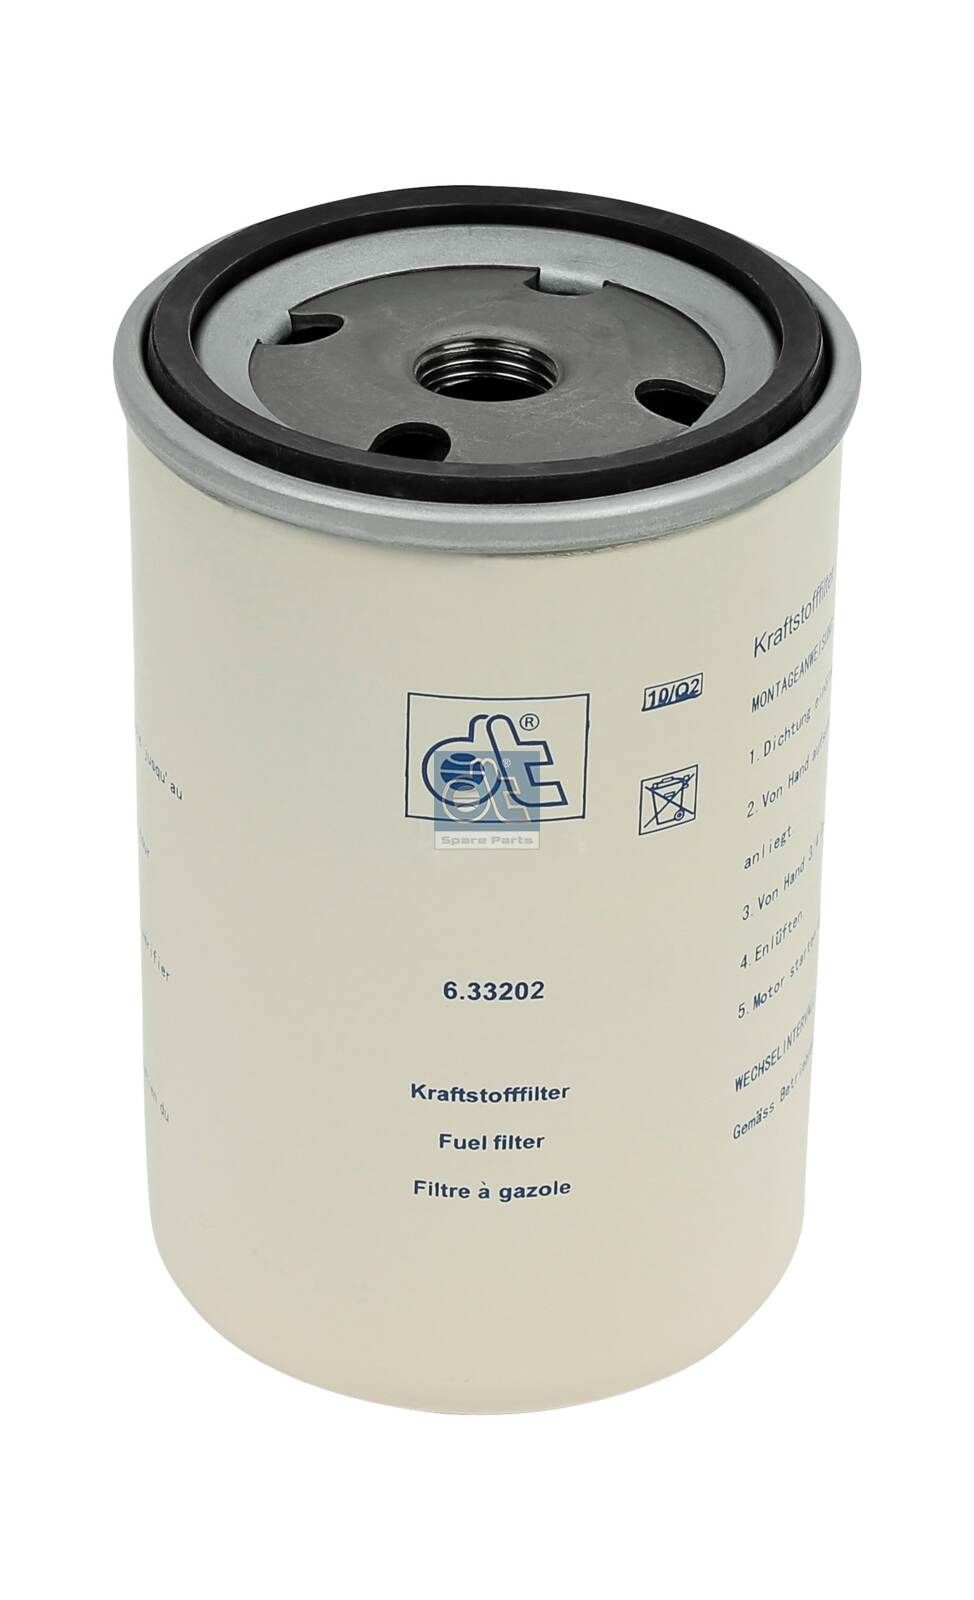 WK 727 DT Spare Parts 6.33202 Fuel filter 1401462